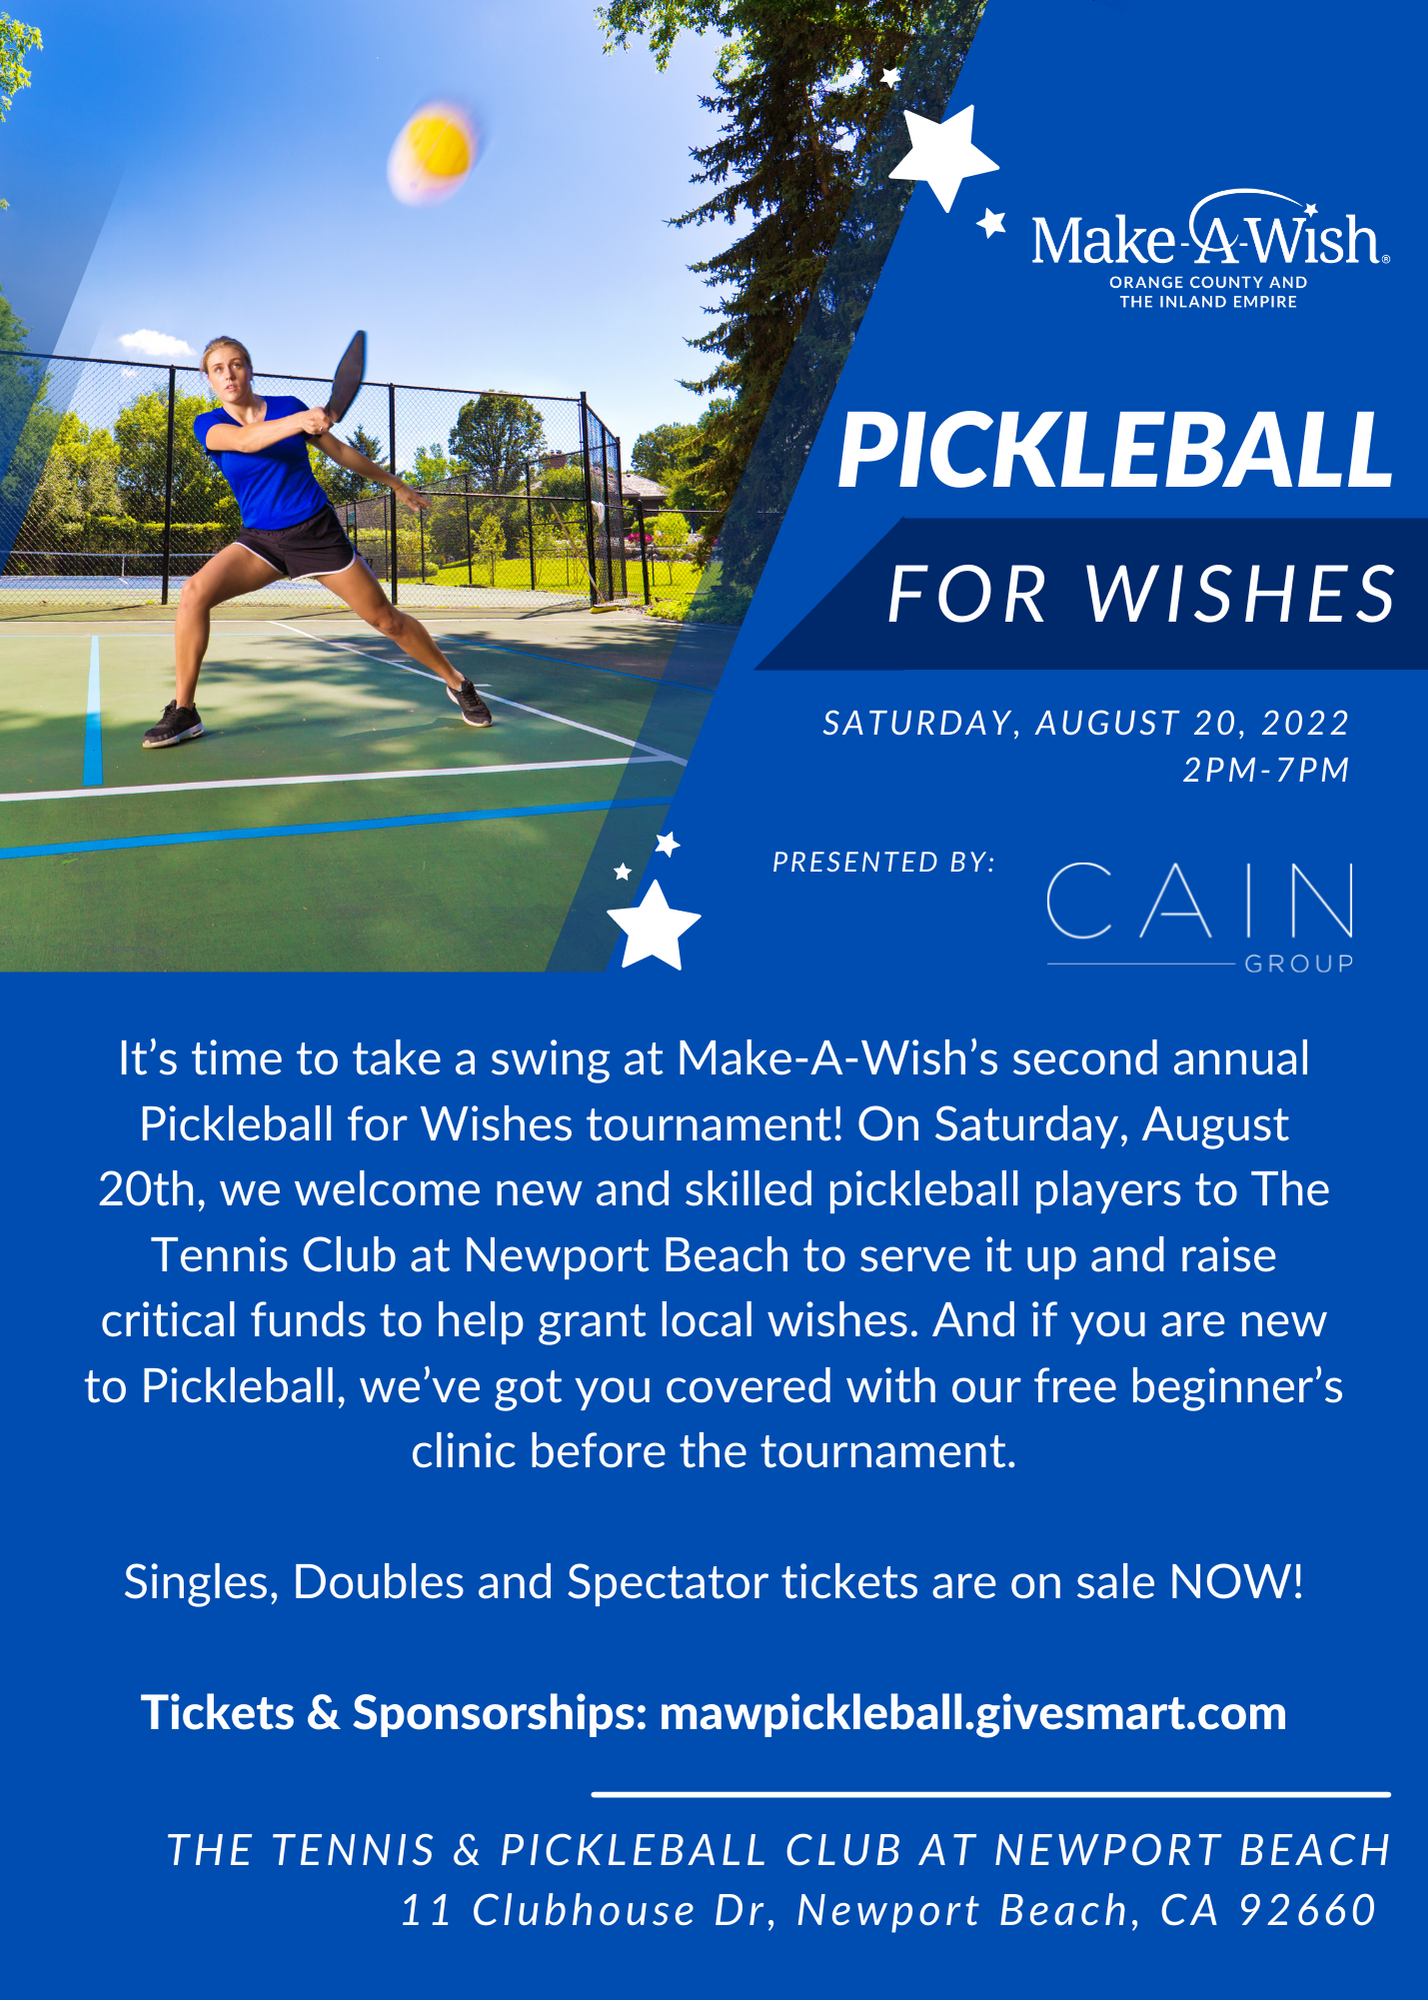 Make-a-Wish - Pickleball for Wishes